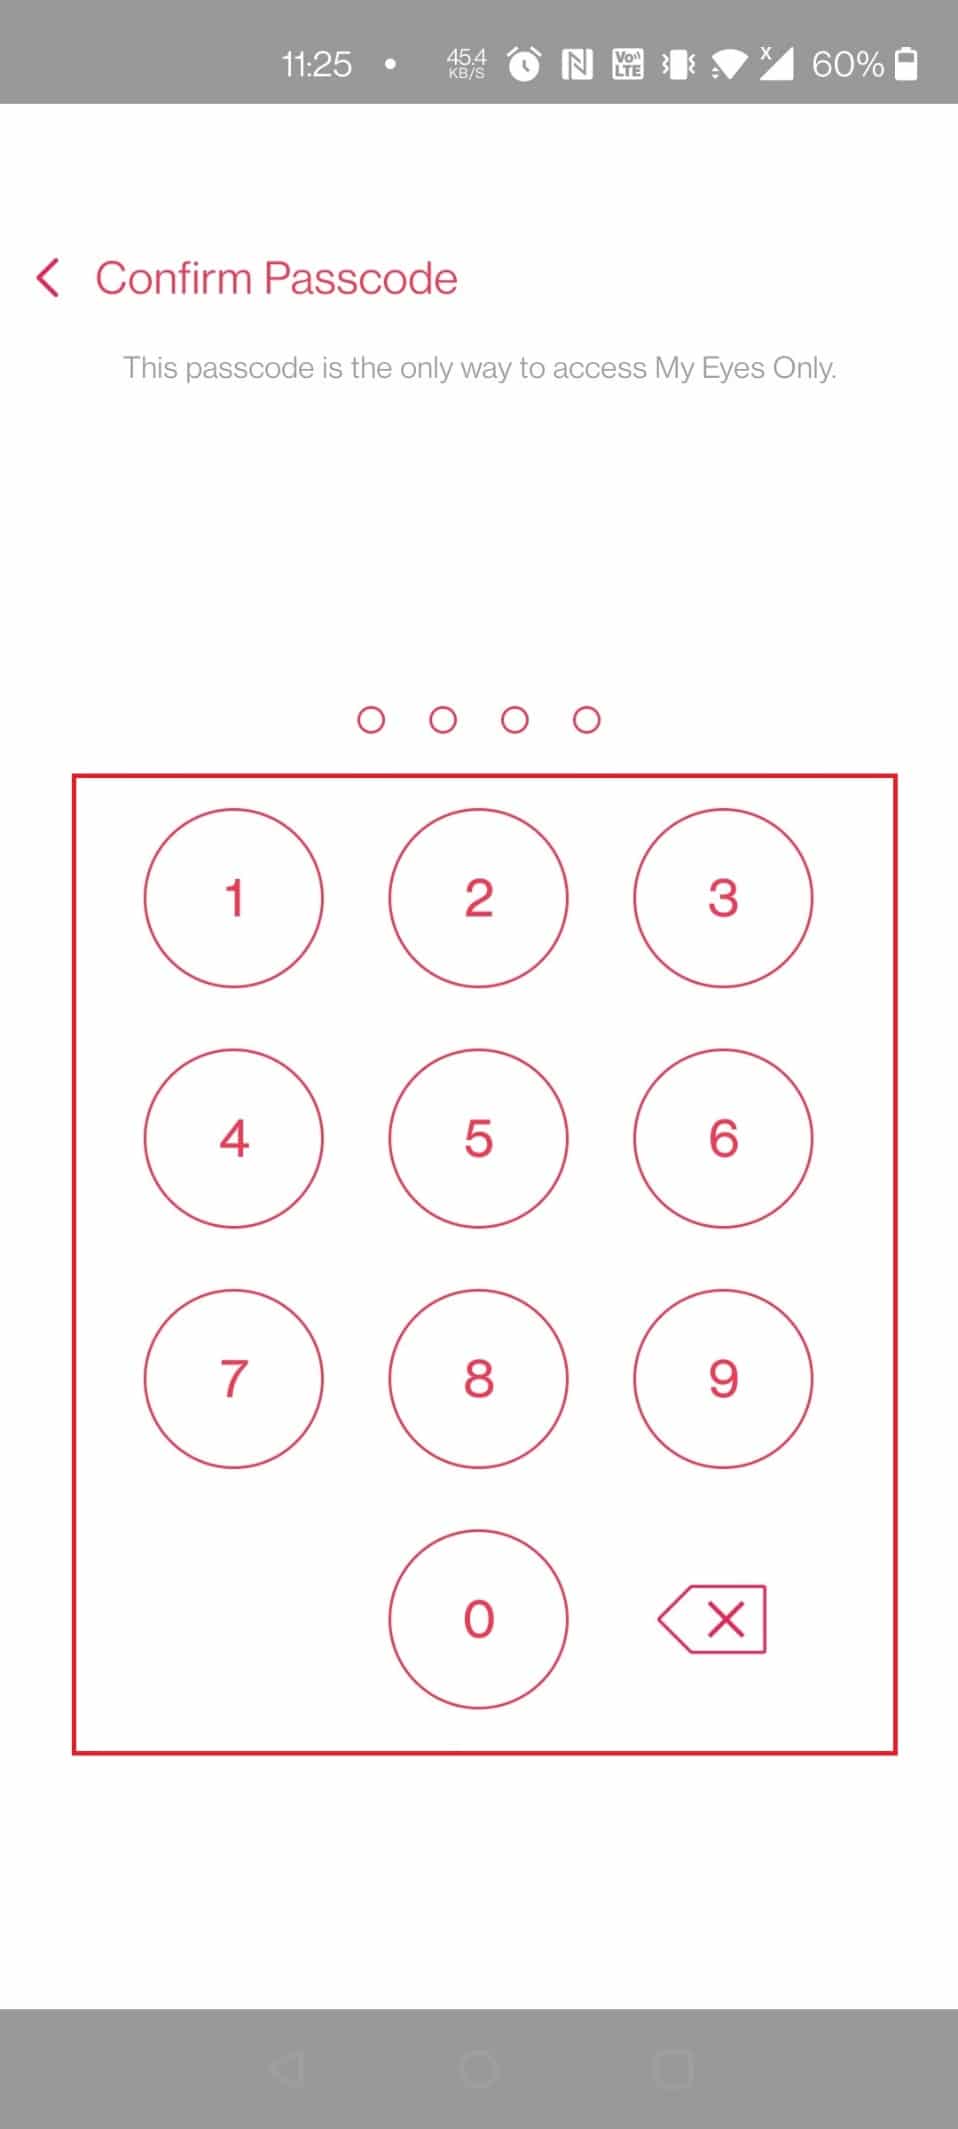 Confirm Passcode to complete the process. How to Find Hidden Things on iPhone